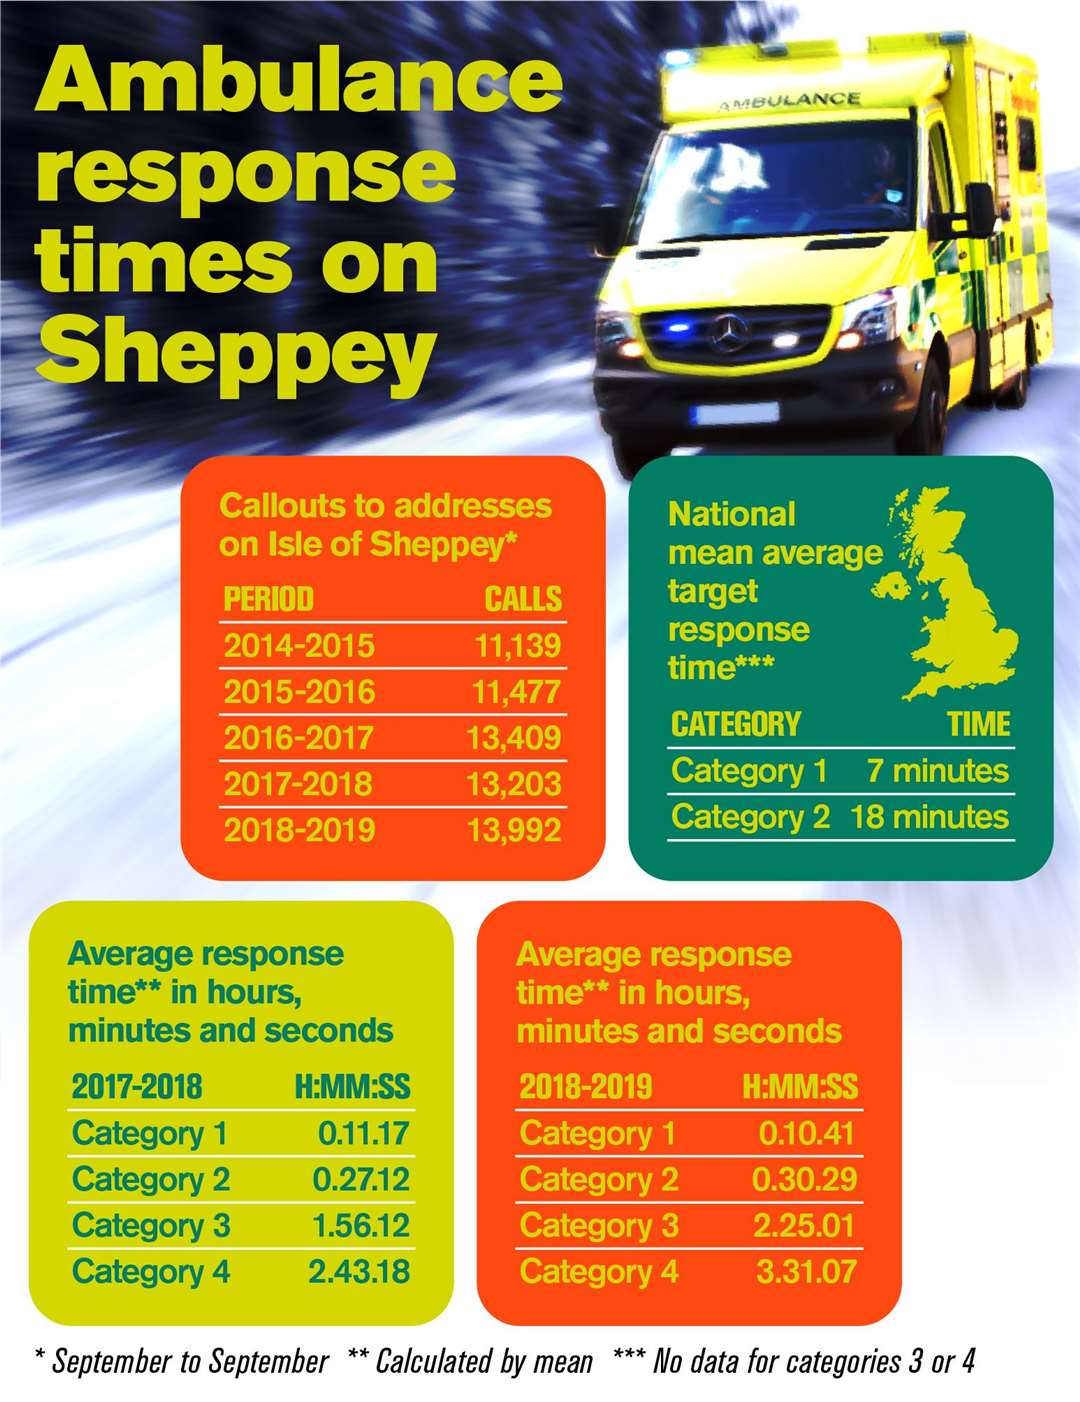 Ambulance response times for calls to the Isle of Sheppey. Image: Editorial Graphics (21041453)